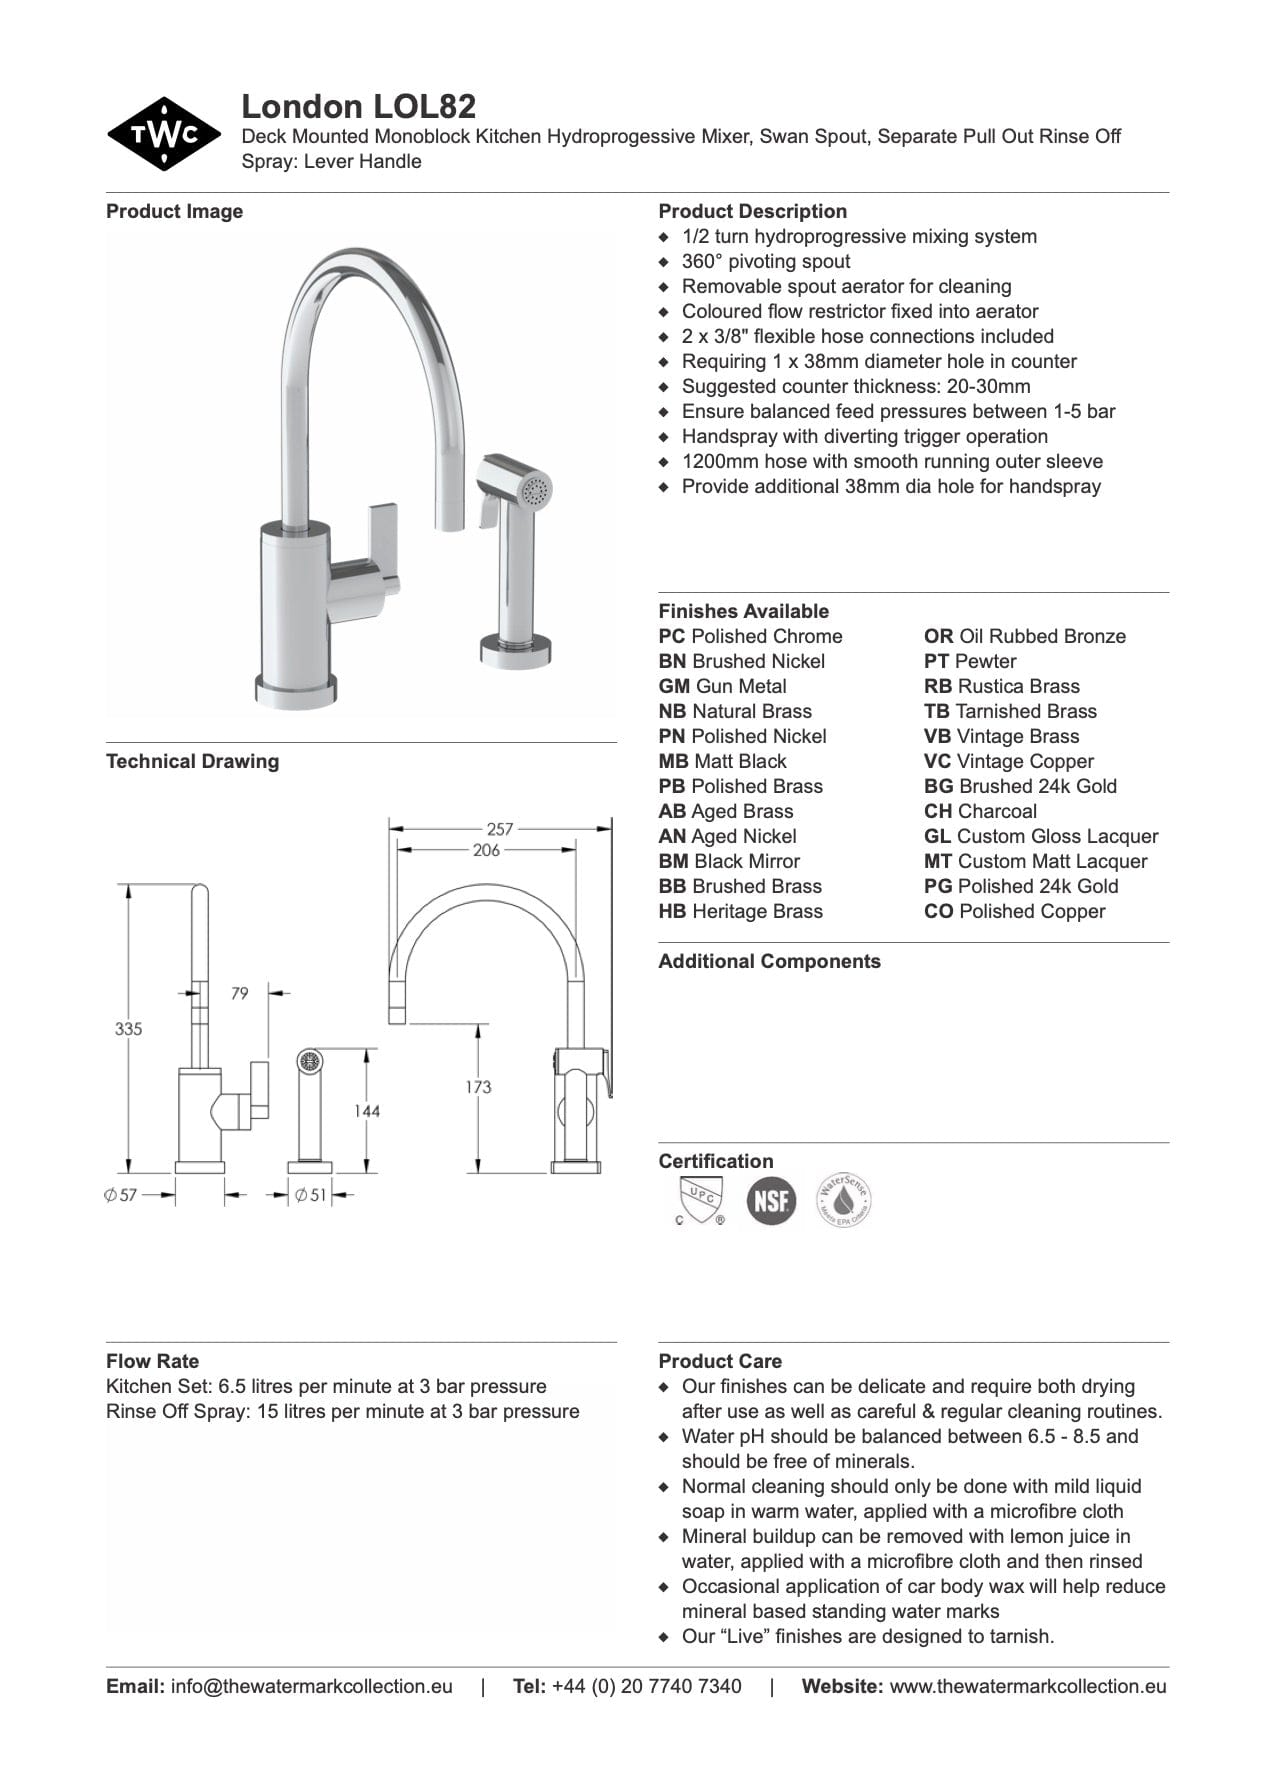 The Watermark Collection Kitchen Taps Polished Chrome The Watermark Collection London Monoblock Kitchen Mixer with Swan Spout & Seperate Pull Out Rinse Spray | Lever Handle